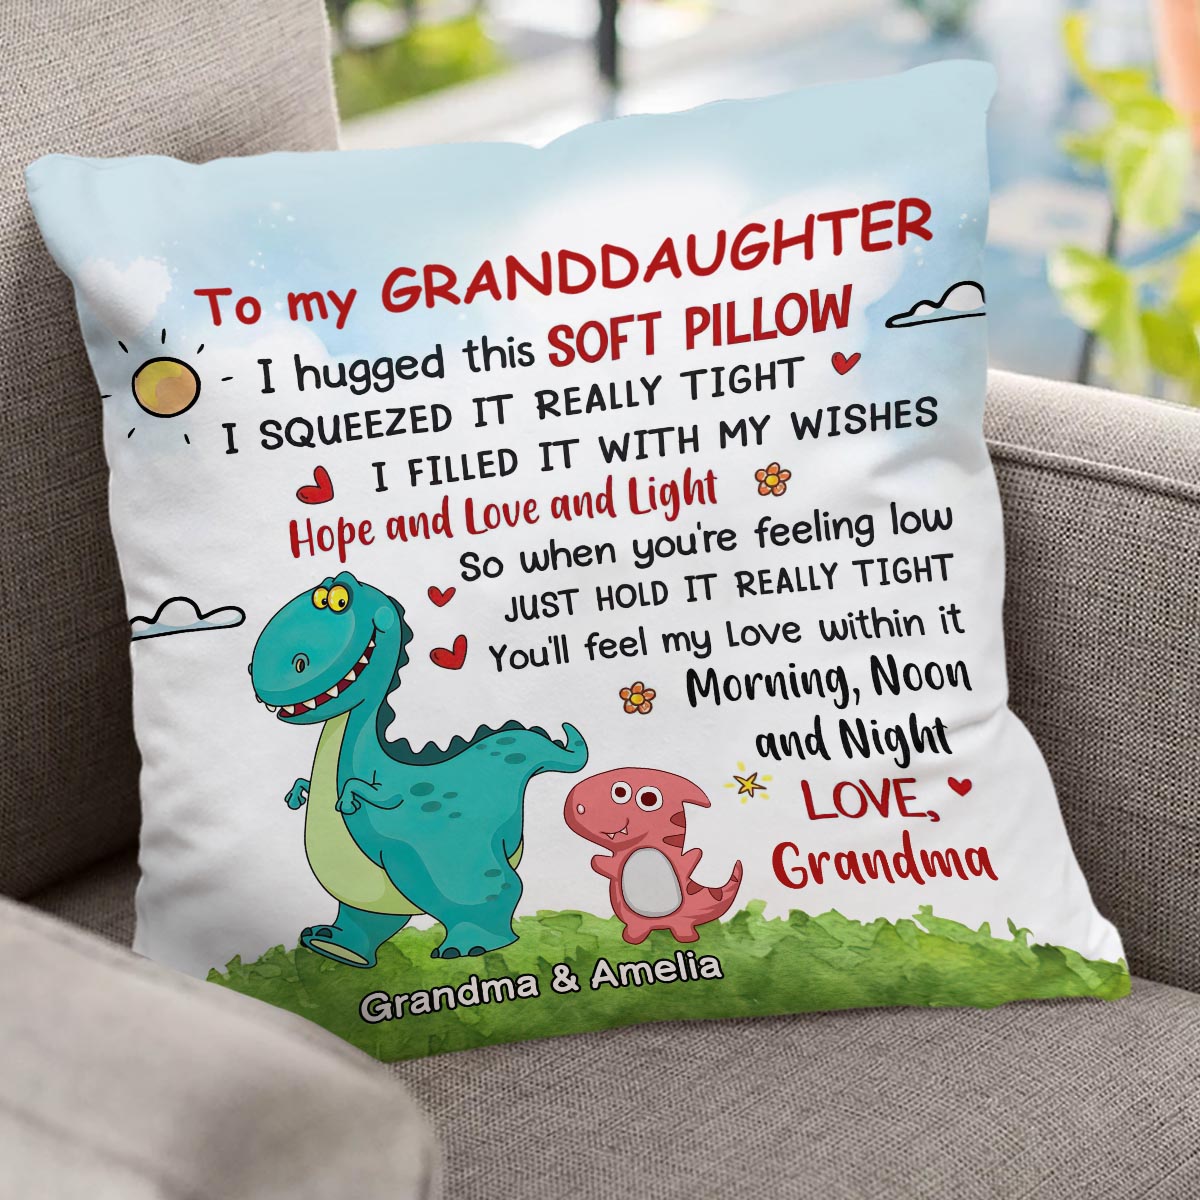 You'll Feel My Love - Personalized Mother's Day Grandma Throw Pillow